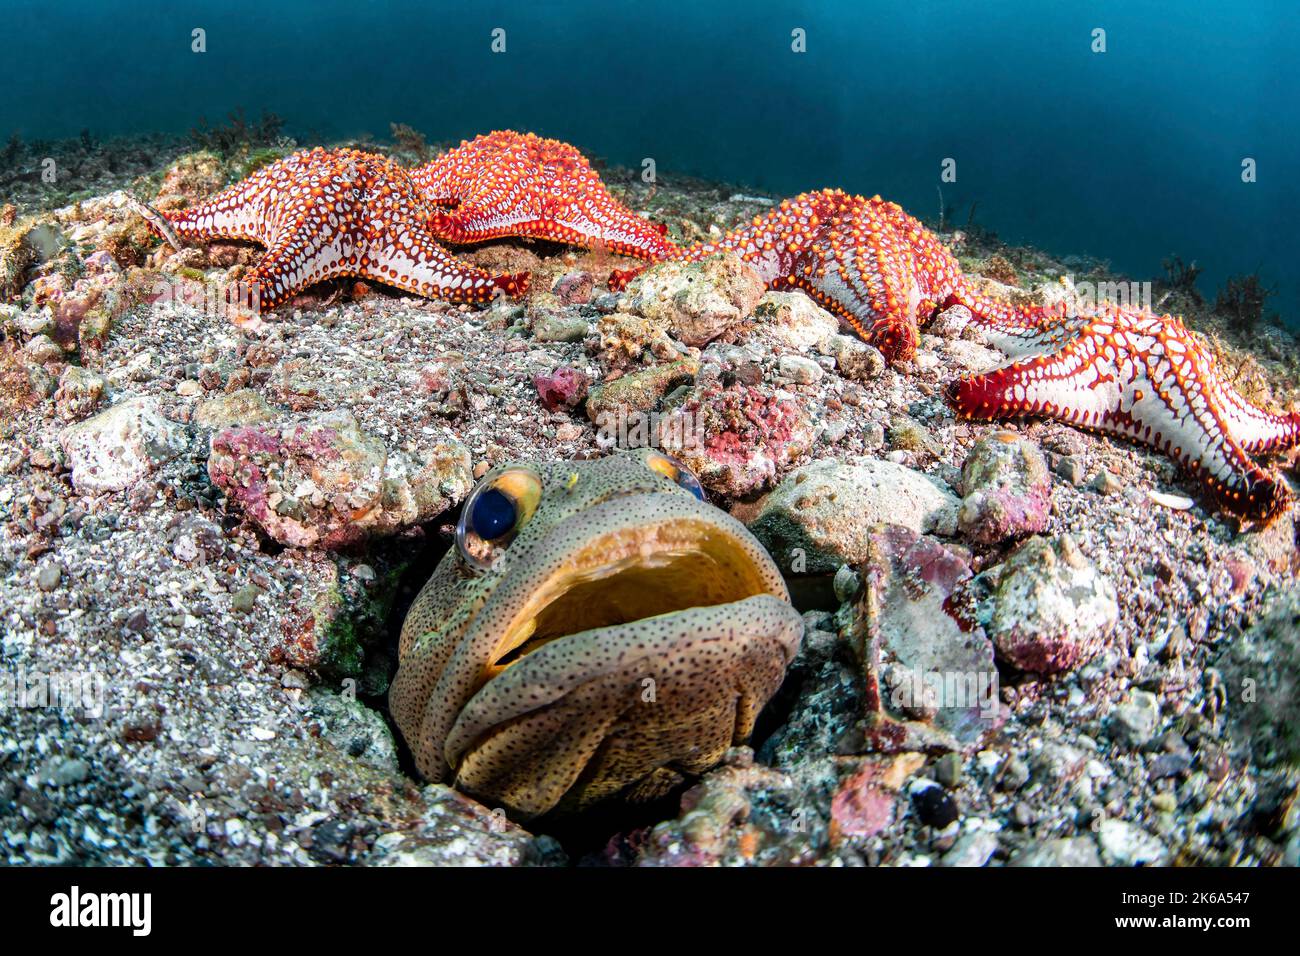 A finespotted jawfish surrounded by starfish. Stock Photo